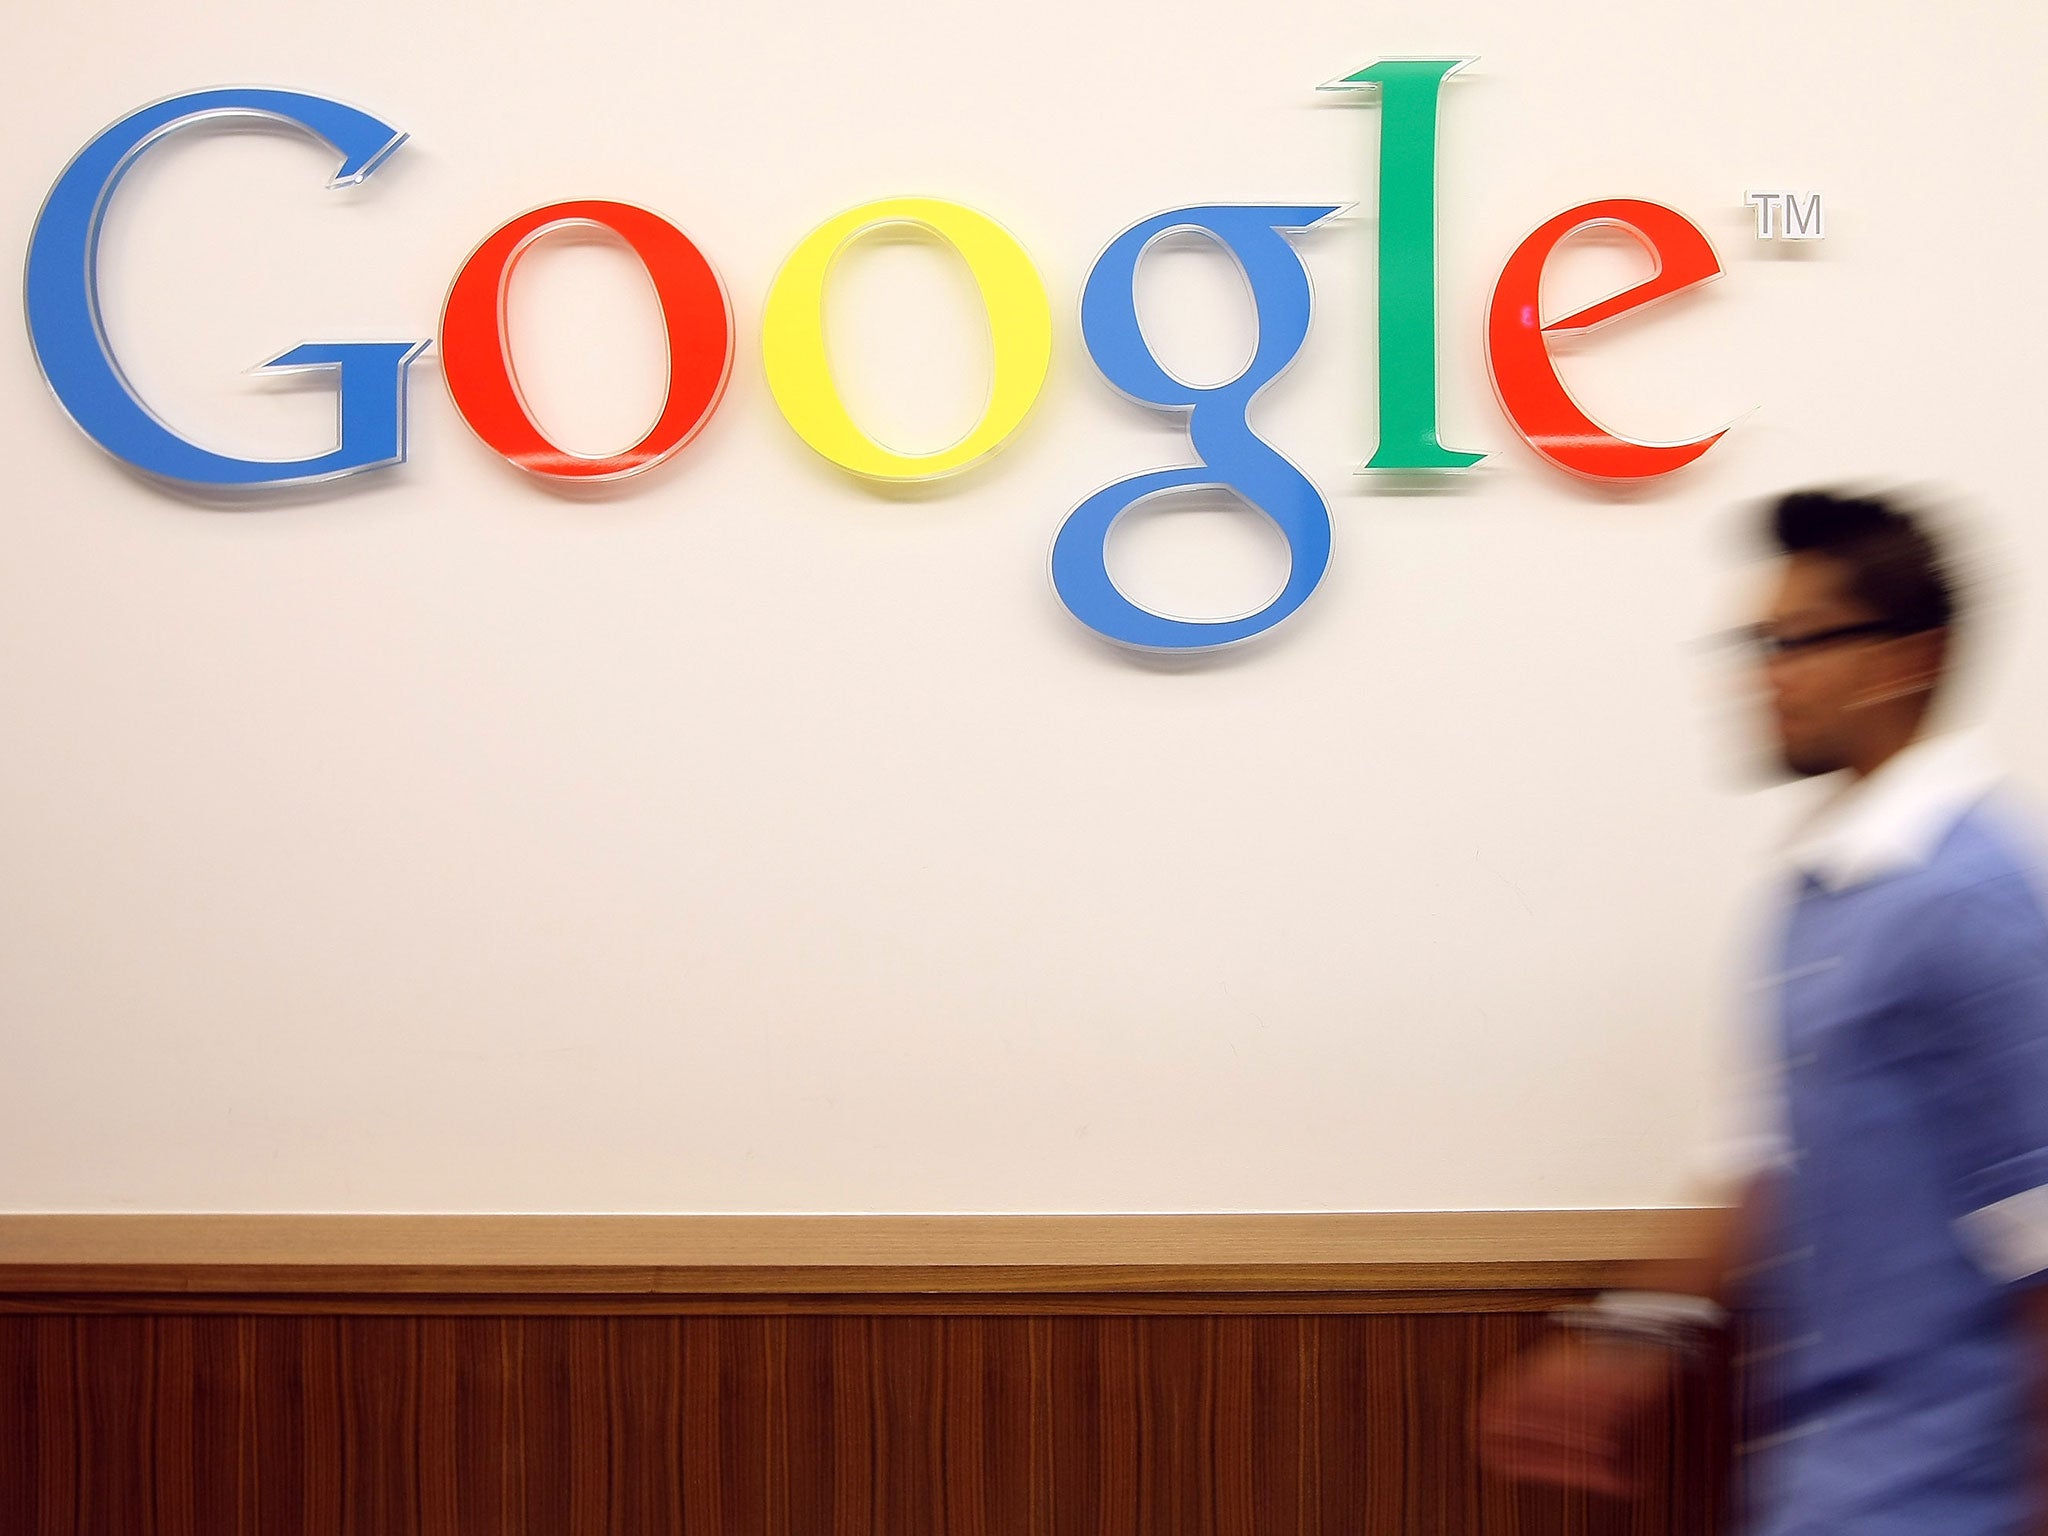 HMRC have coaxed £130m in back payments out of Google over a period of 10 years